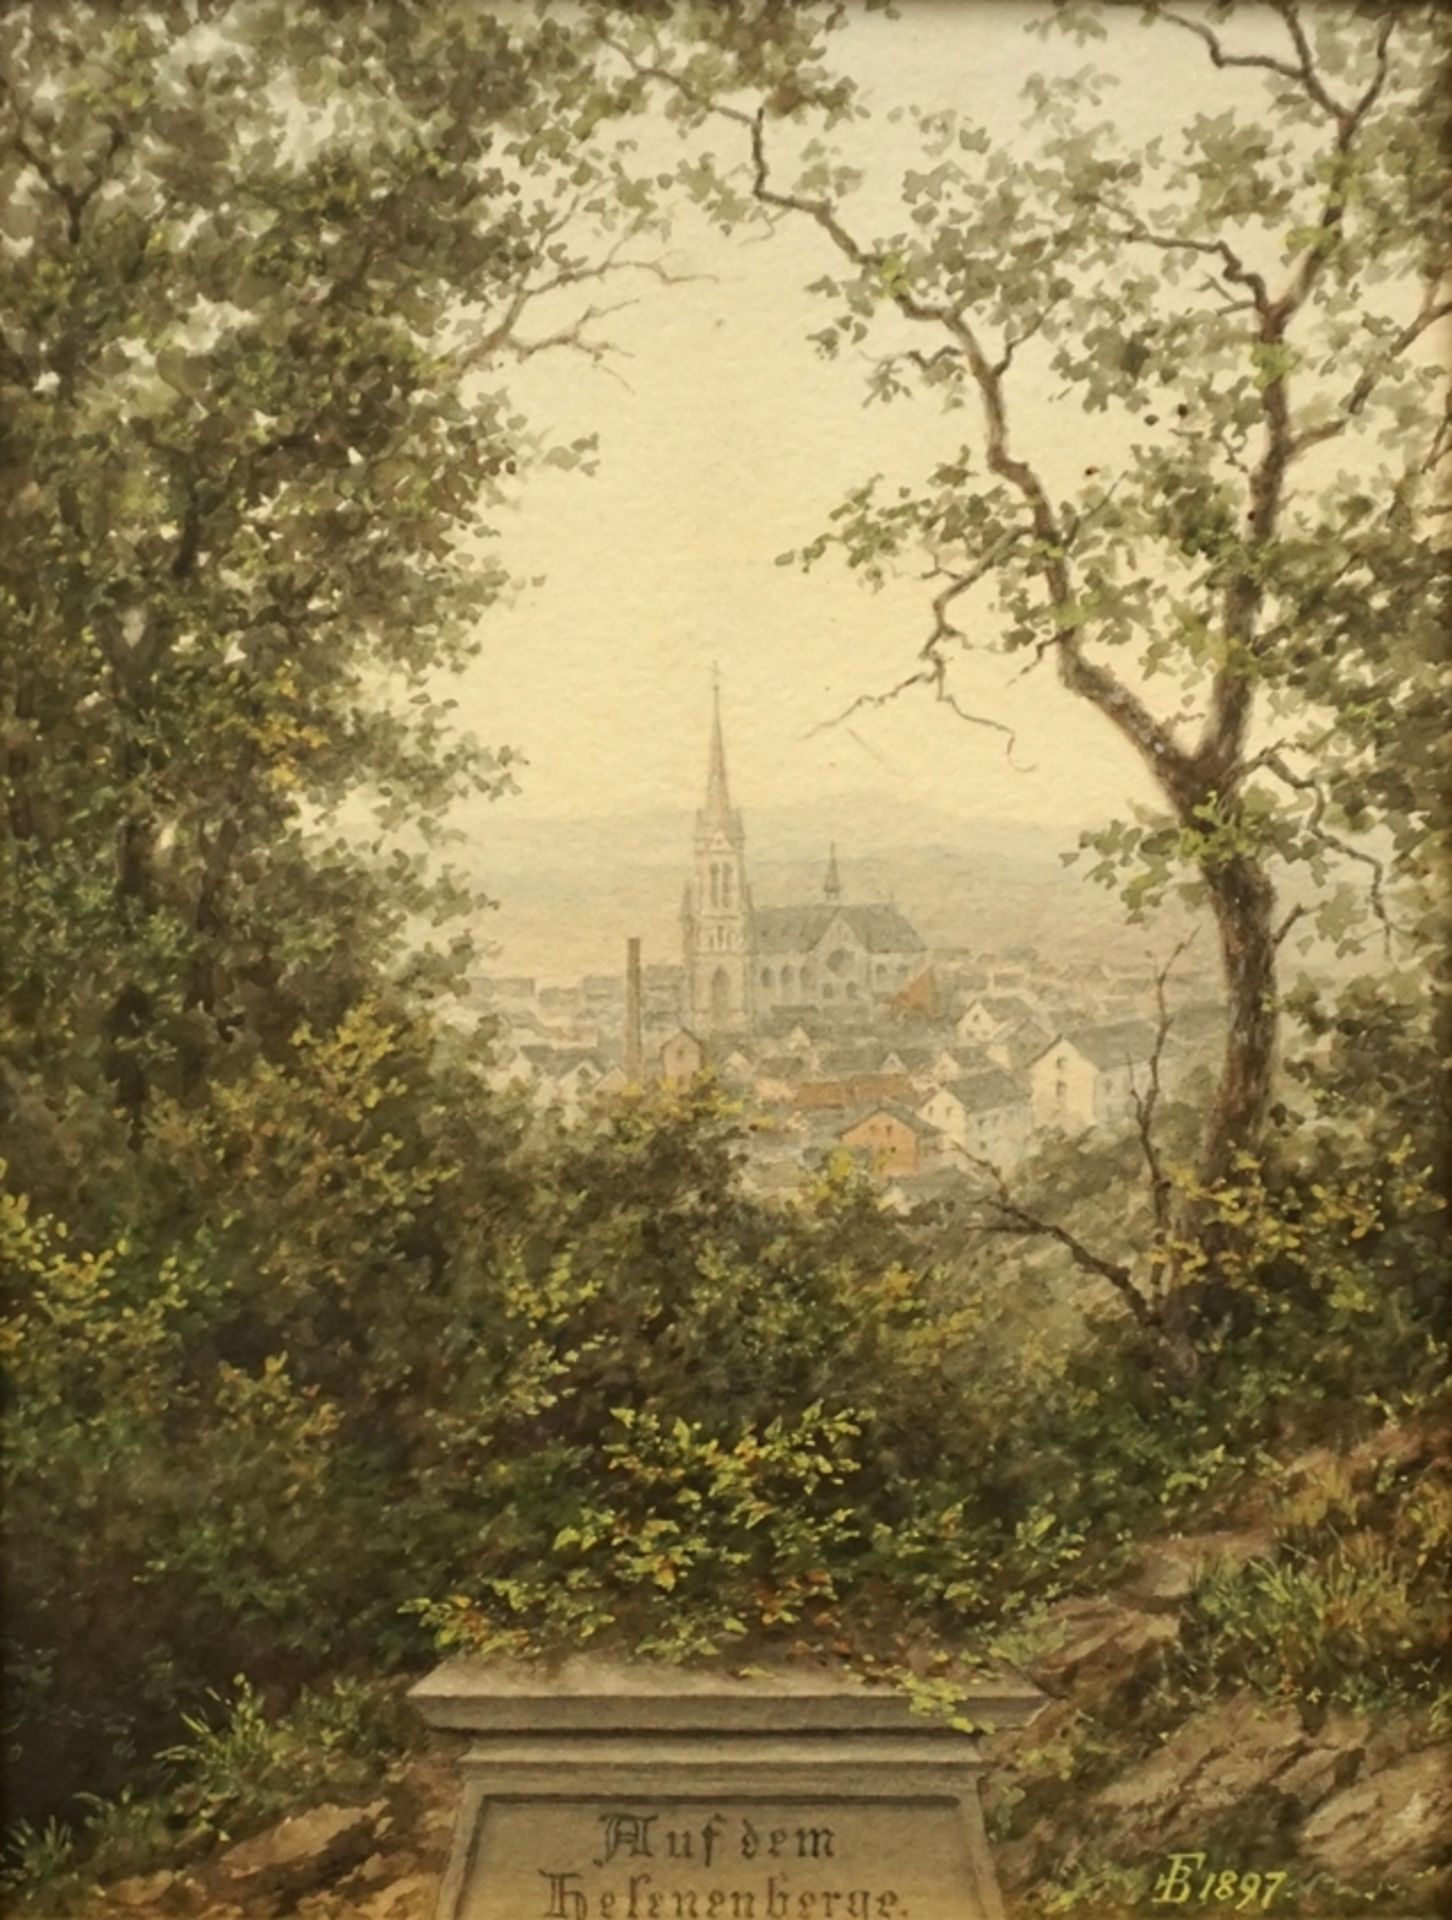 monogrammed FB, "On the Helenenberg (with a view of the church)", 1897, watercolor - Image 2 of 2